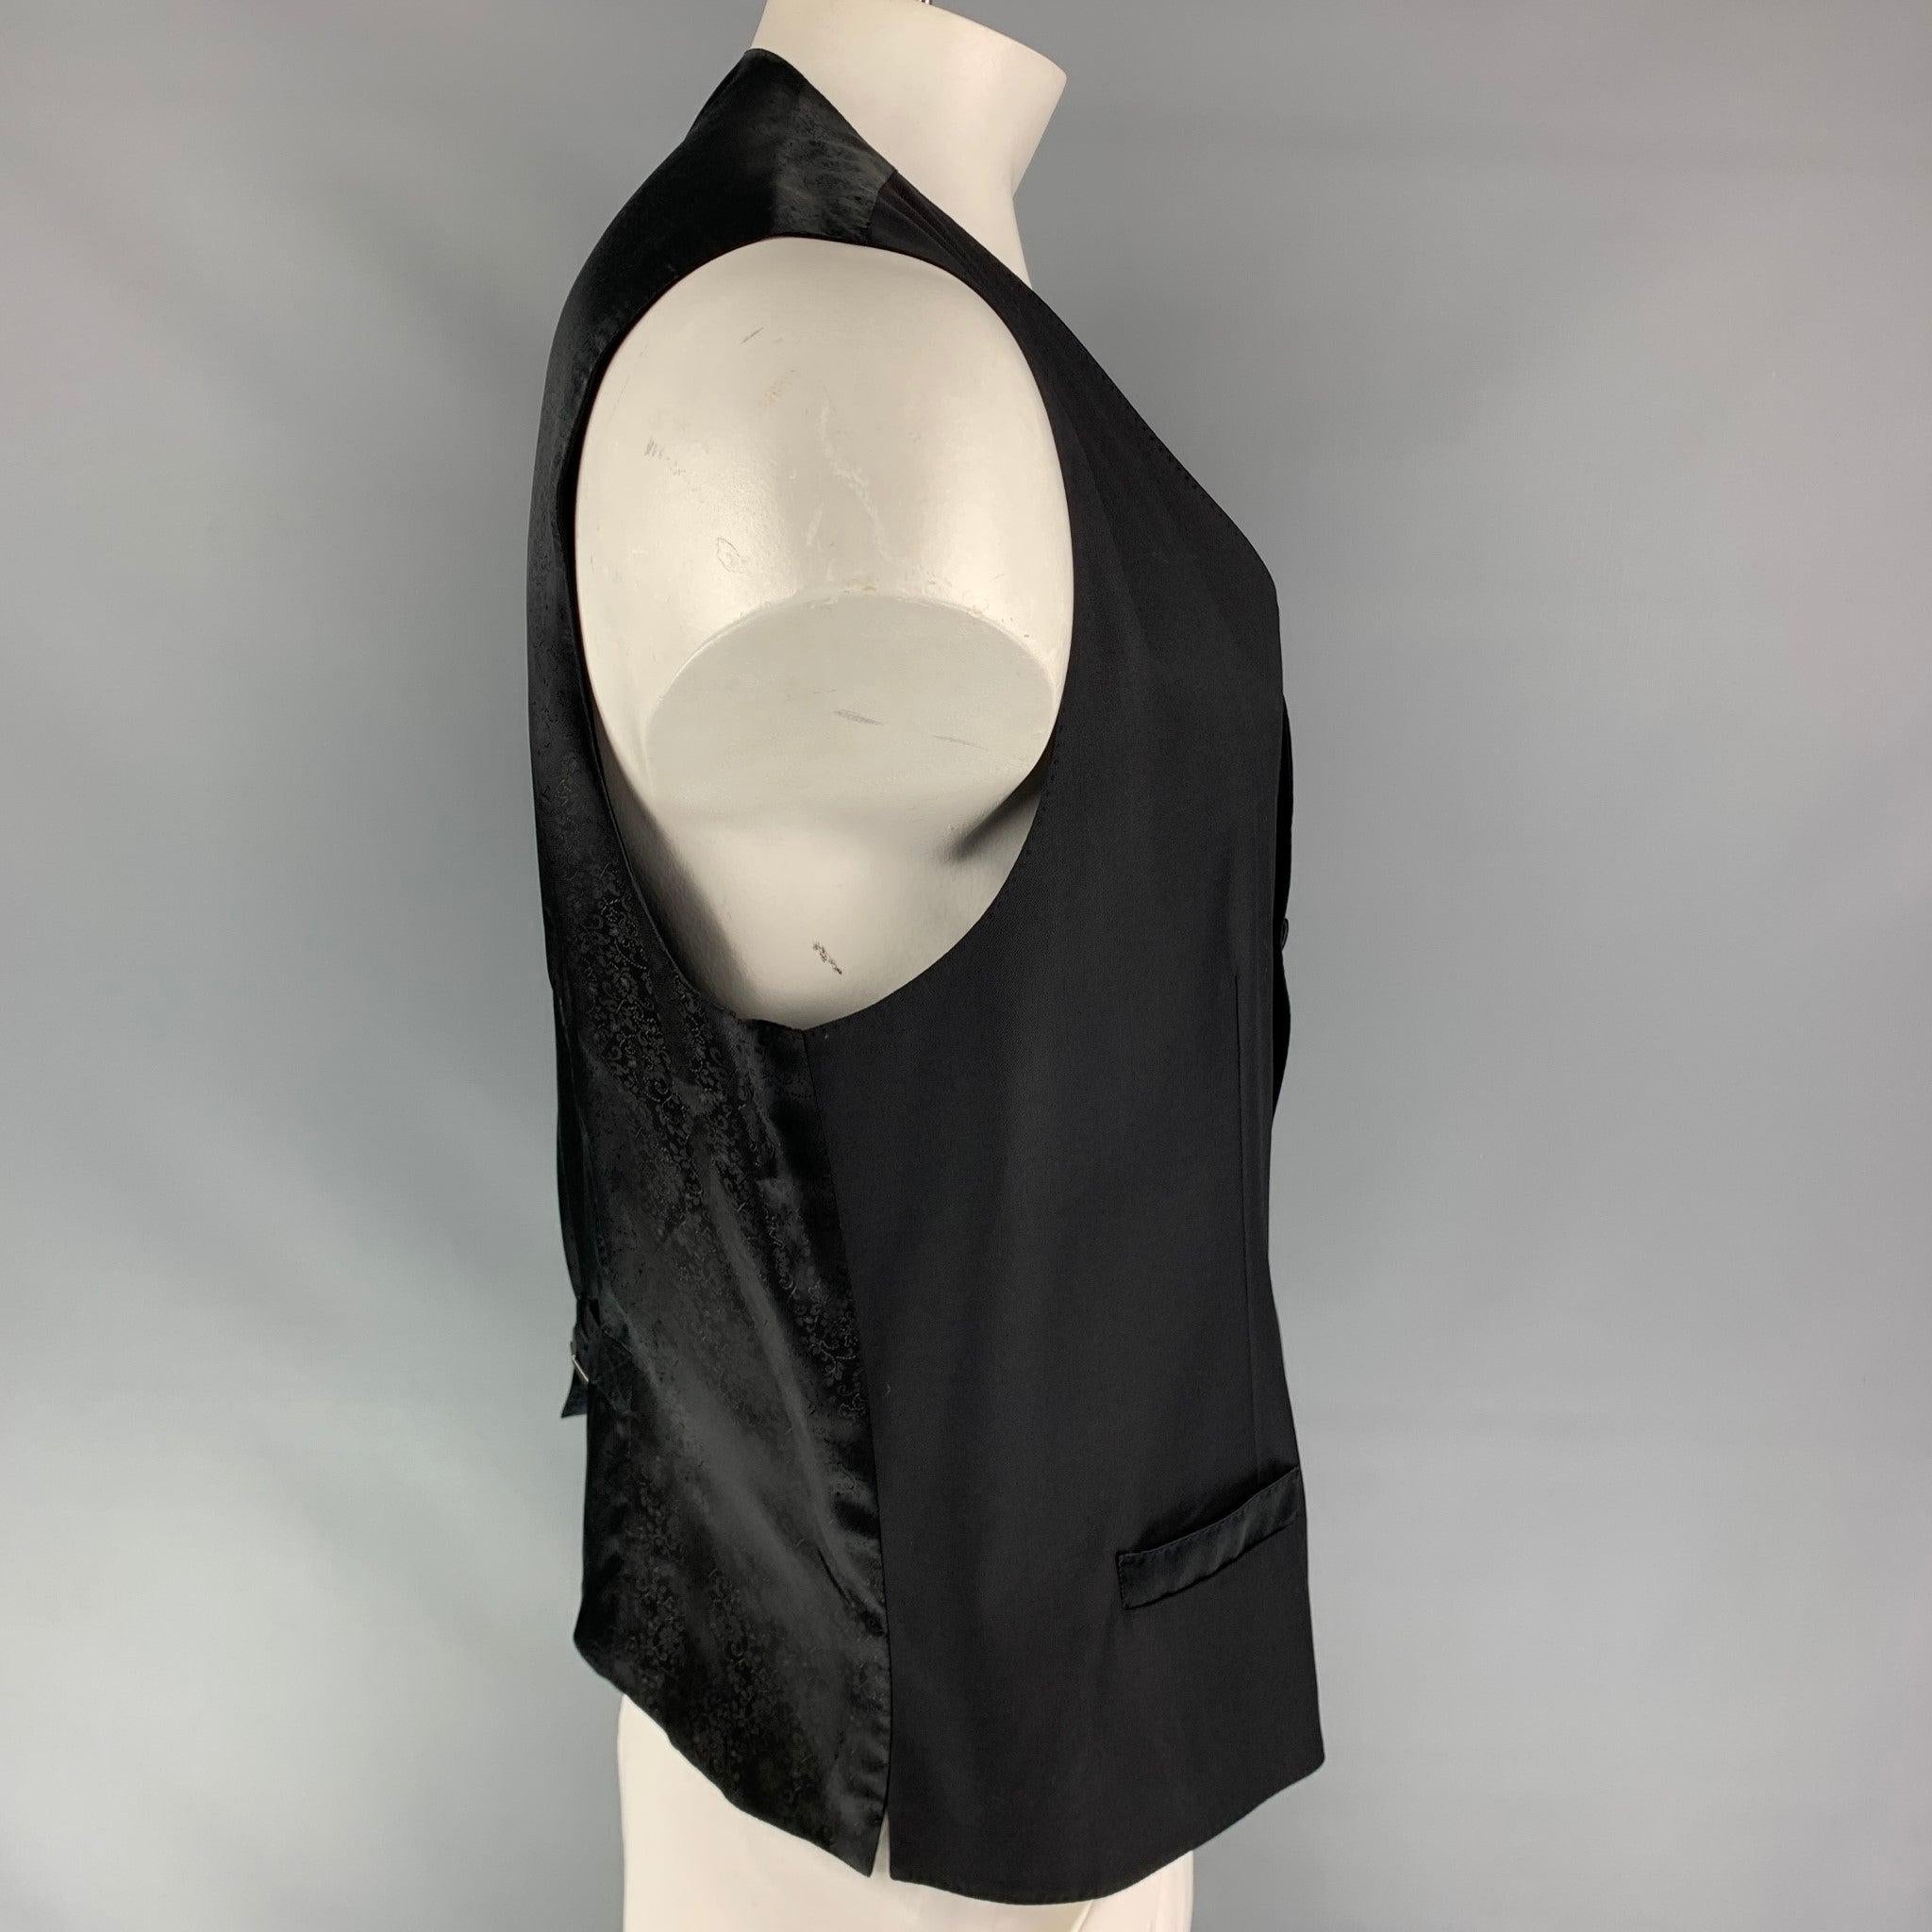 DOLCE & GABBANA vest comes in black wool blend featuring a classic style, back belt, slit pockets, and a buttoned closure. Made in Italy.Very Good
Pre-Owned Condition. 

Marked:   58 

Measurements: 
 
Shoulder: 16 inches  Chest: 44 inches  Length: